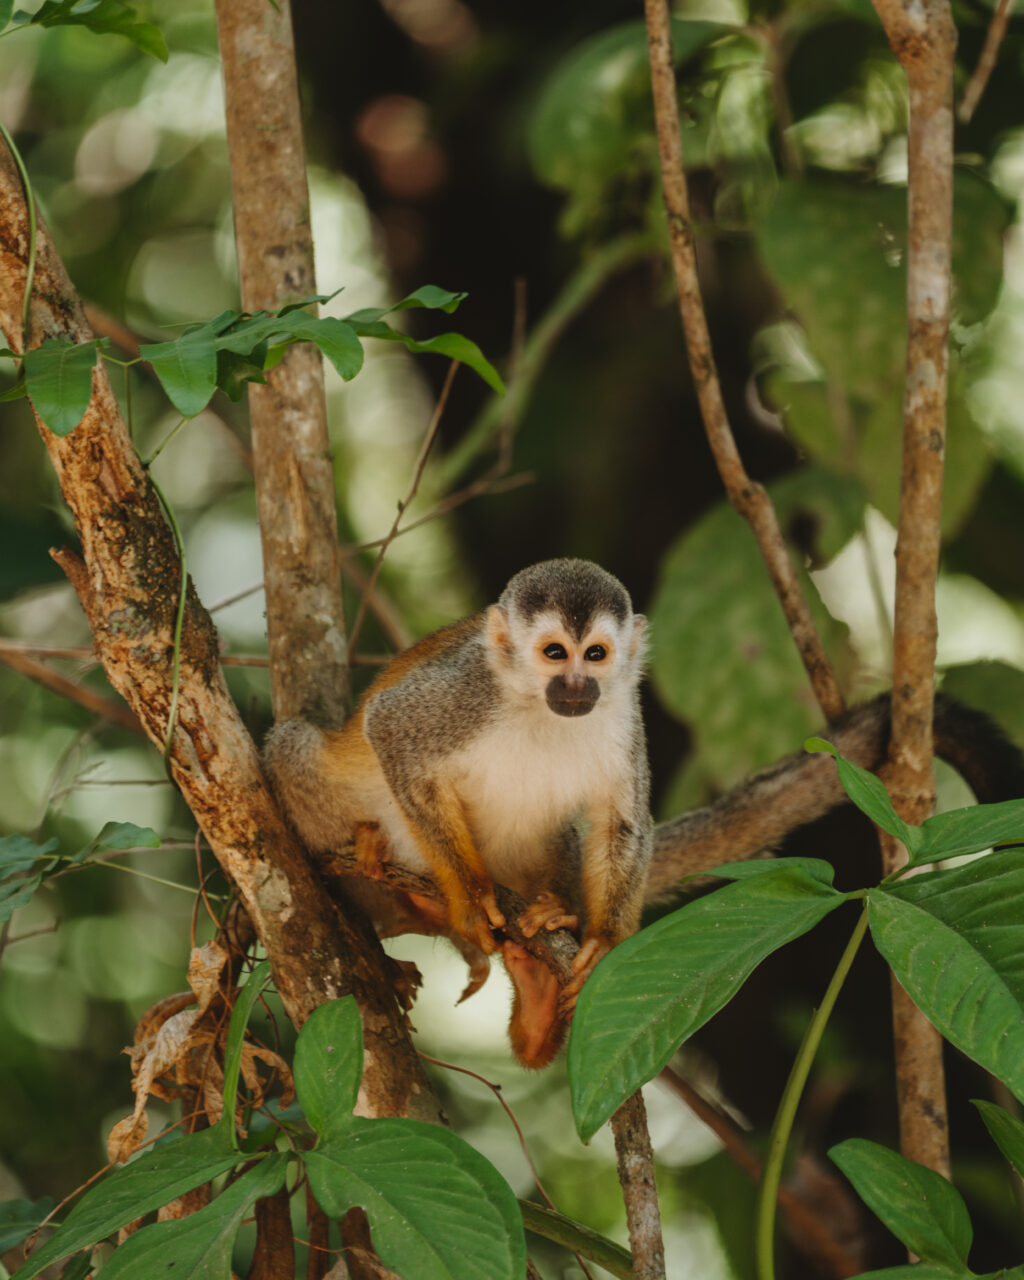 Costa Rica Wildlife - A small monkey sitting on a tree branch